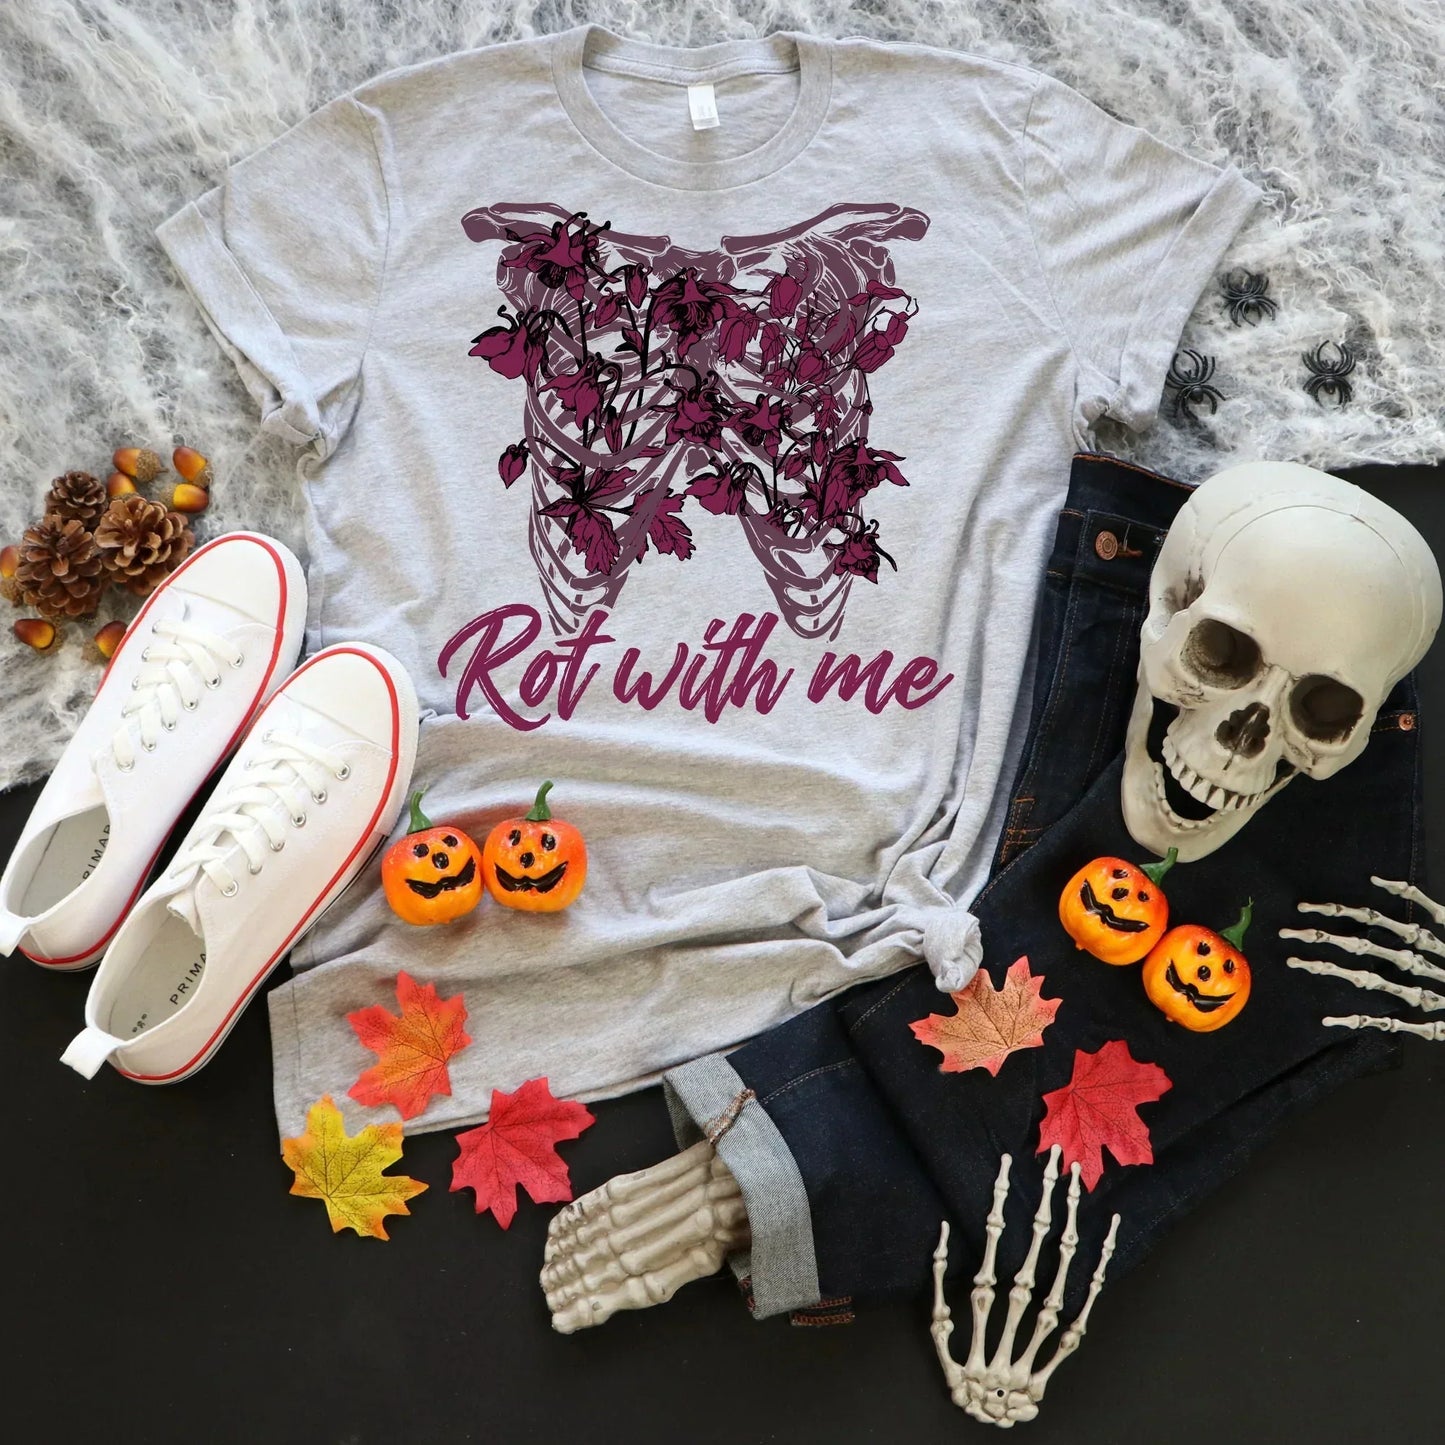 Gothic Shirt, Halloween Sweatshirt, Witchy Vibes, Bats & Dead Roses Shirt, Moon Shirt, Magical Witch Shirt, Goth Style, Rot with Me, EMO Tee